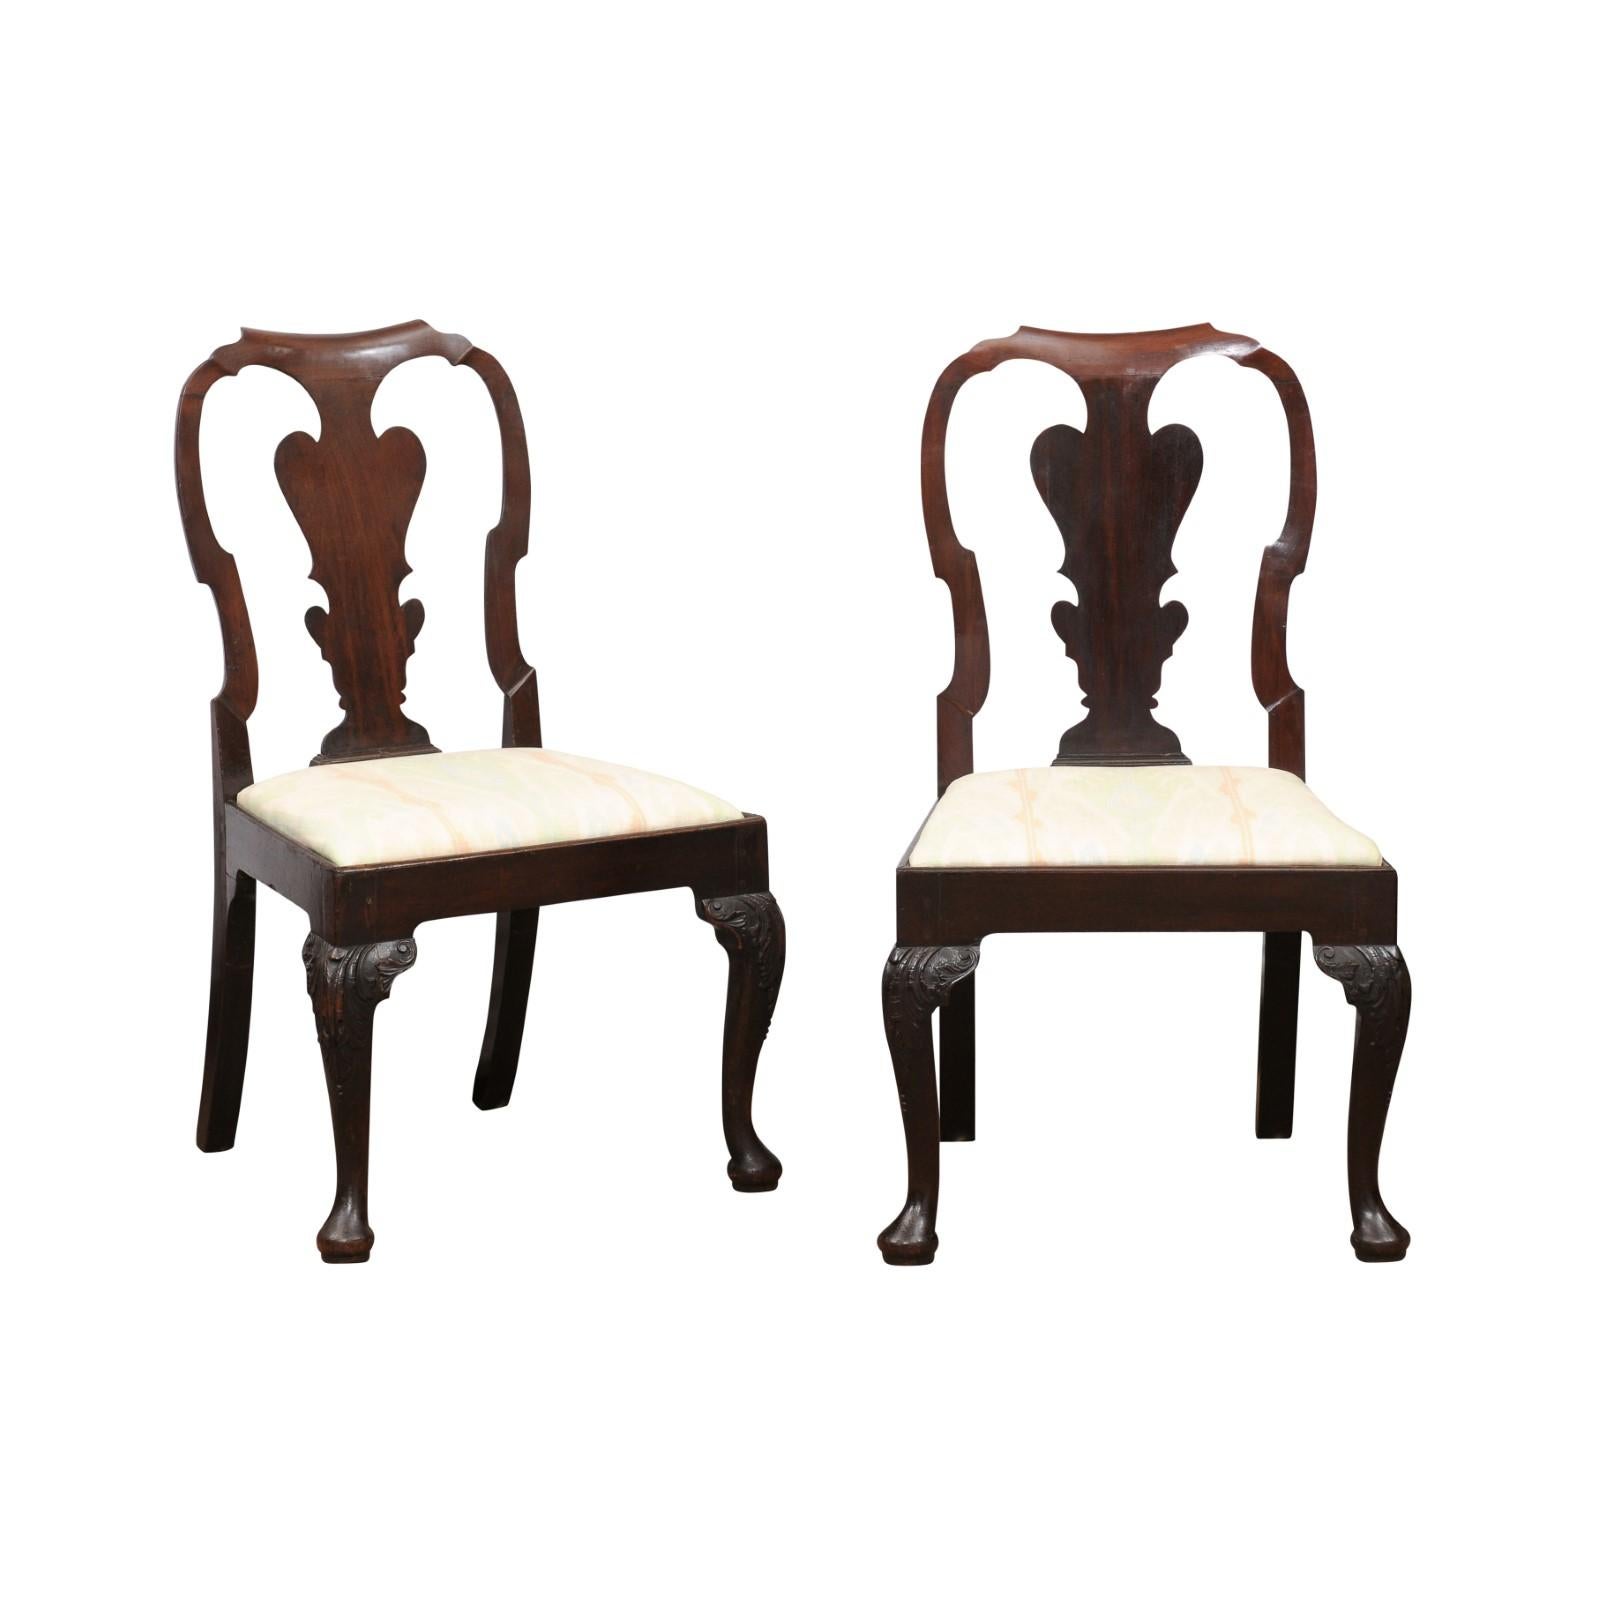 English Pair of Queen Anne Walnut Side Chairs, 18th Century England For Sale